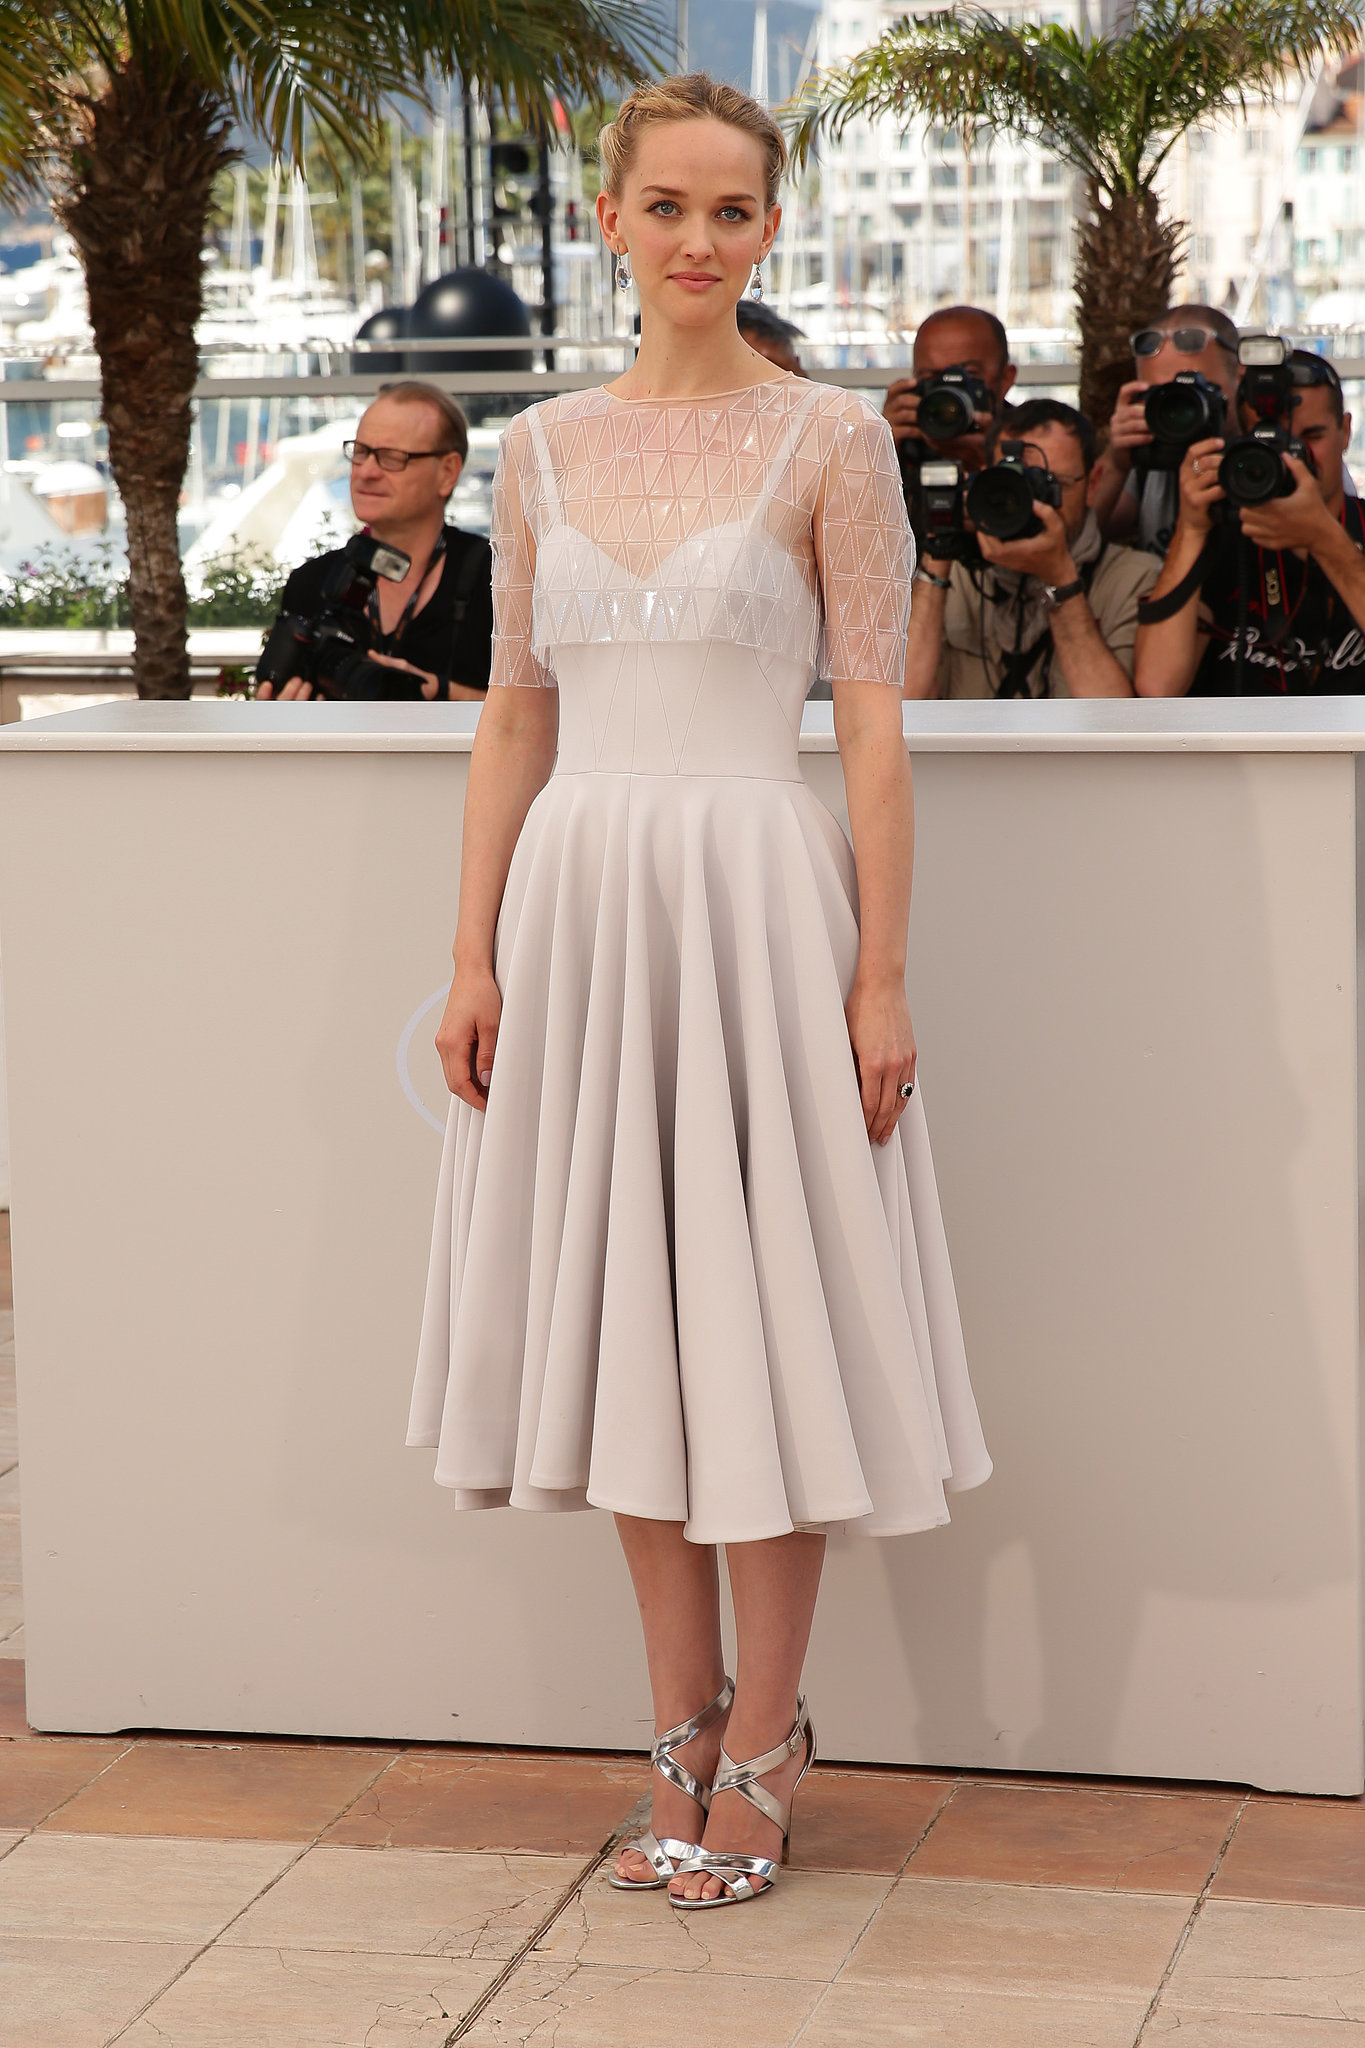 Jess Weixler at a The Disappearance of Eleanor Rigby Photocall